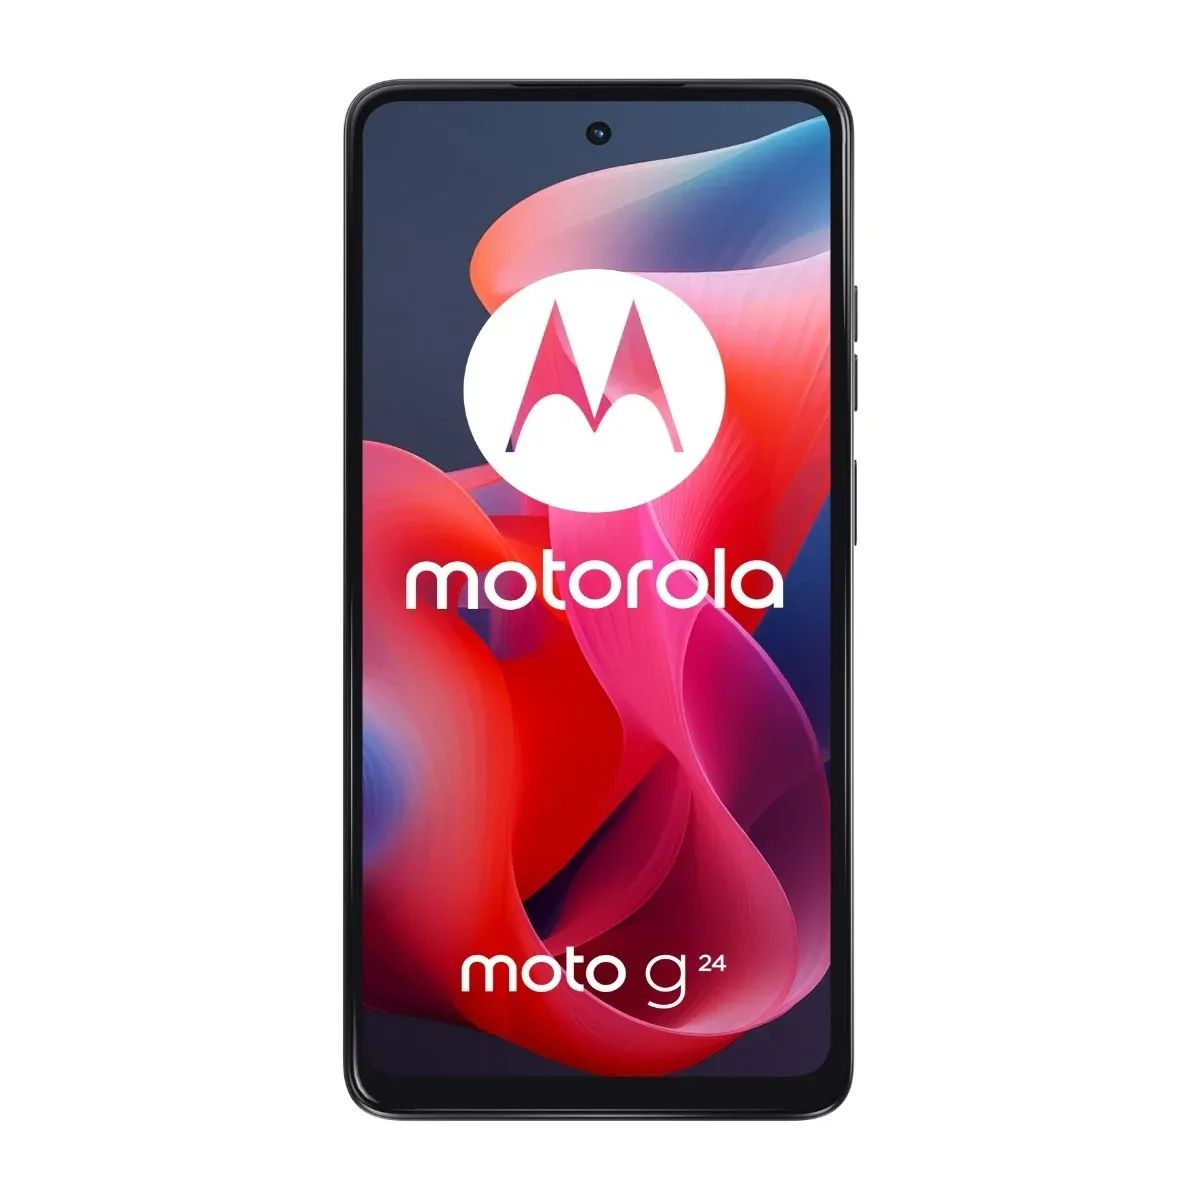 Upcoming Motorola Moto G24 smartphone’s Pricing, Specs, and Renders leaked ahead of its official launch